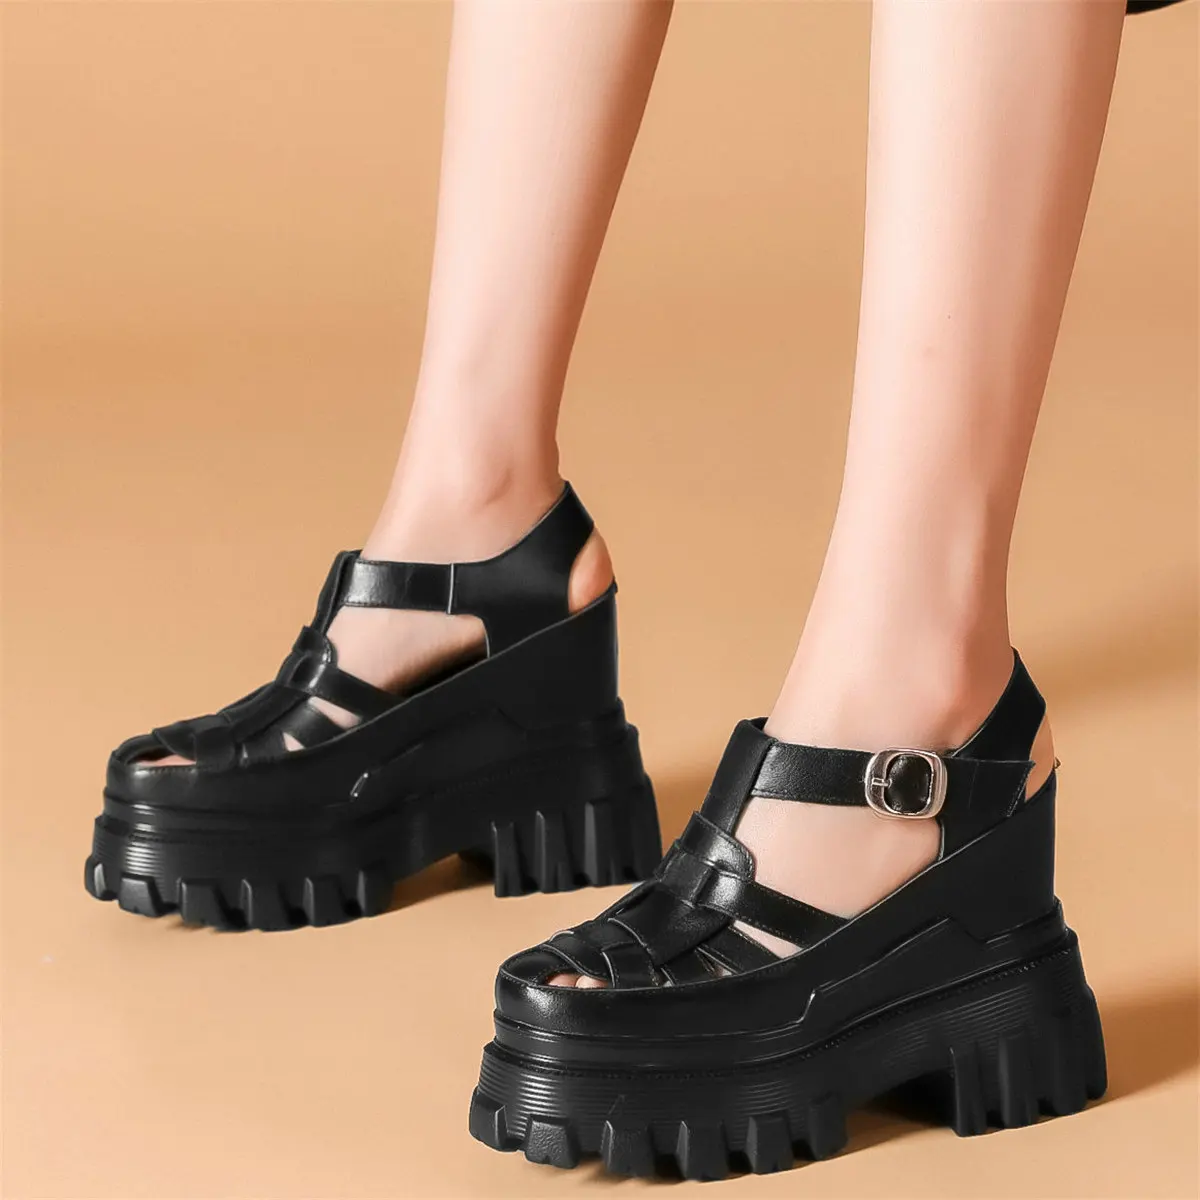 

12cm Super High Heels Fashion Sneakers Women Cow Leather Wedges Gladiator Sandals Female Open Toe Platform Pumps Casual Shoes